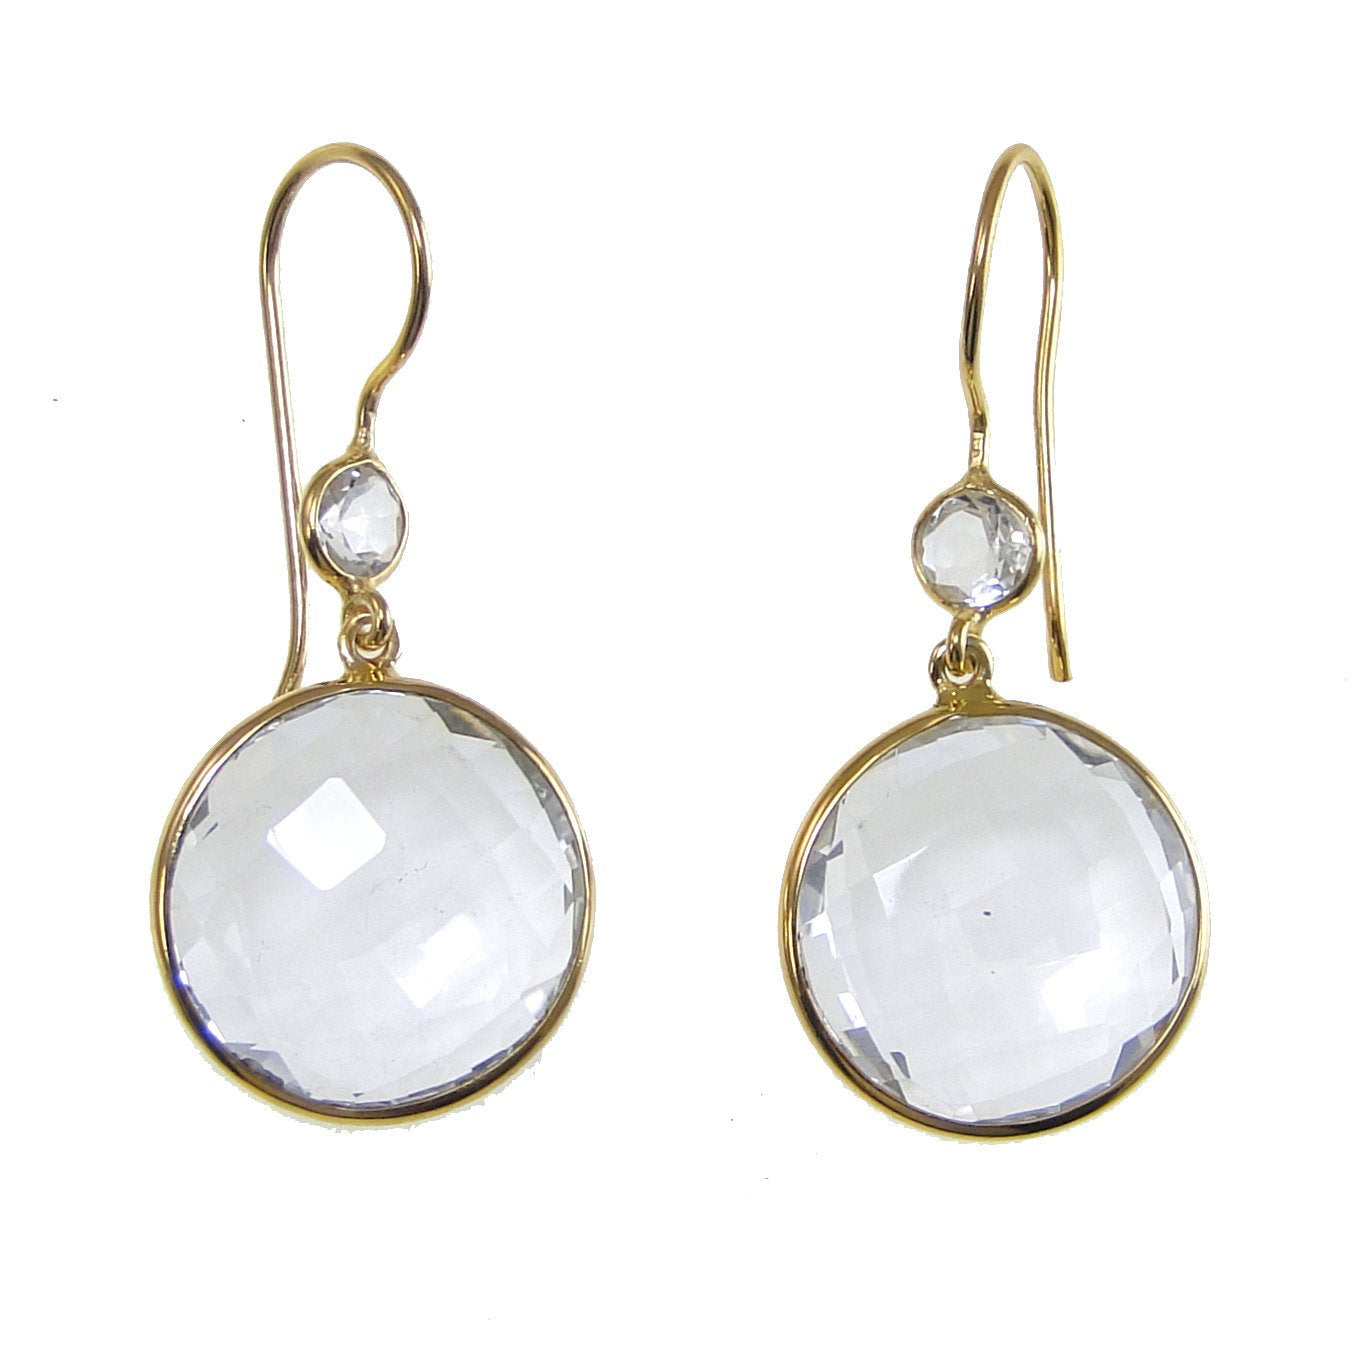 IvoryStone Round Crystal Clear Earrings. •